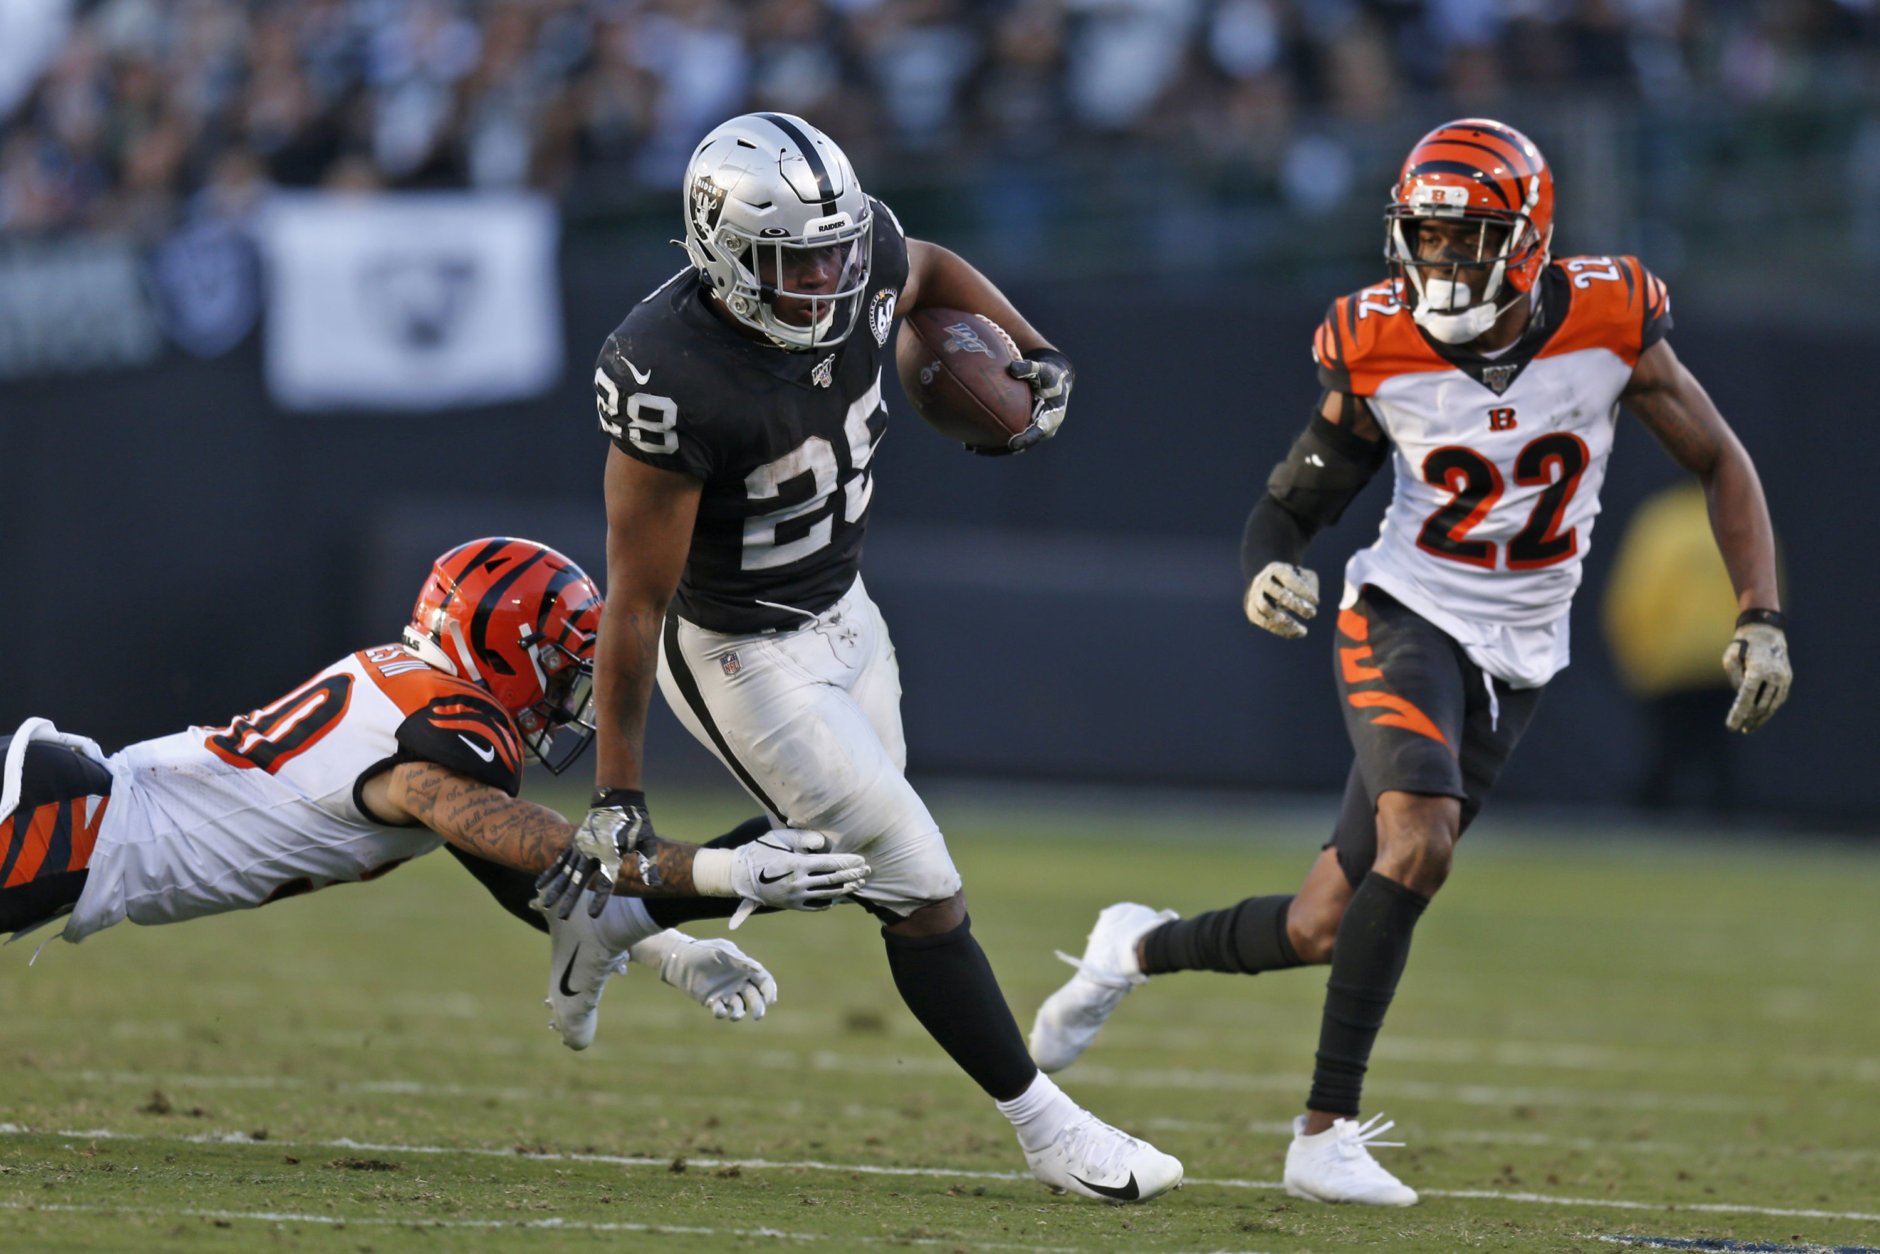 <p><b><i>Bengals 10</i></b><br />
<b><i>Raiders 17</i></b></p>
<p>Zac Taylor is the sixth coach in the Super Bowl era to lose his first 10 games, and first since Cam Cameron&#8217;s ill-fated one-and-done 2007 season in Miami. Who knew hiring a poor man&#8217;s Sean McVay would yield poor results?</p>
